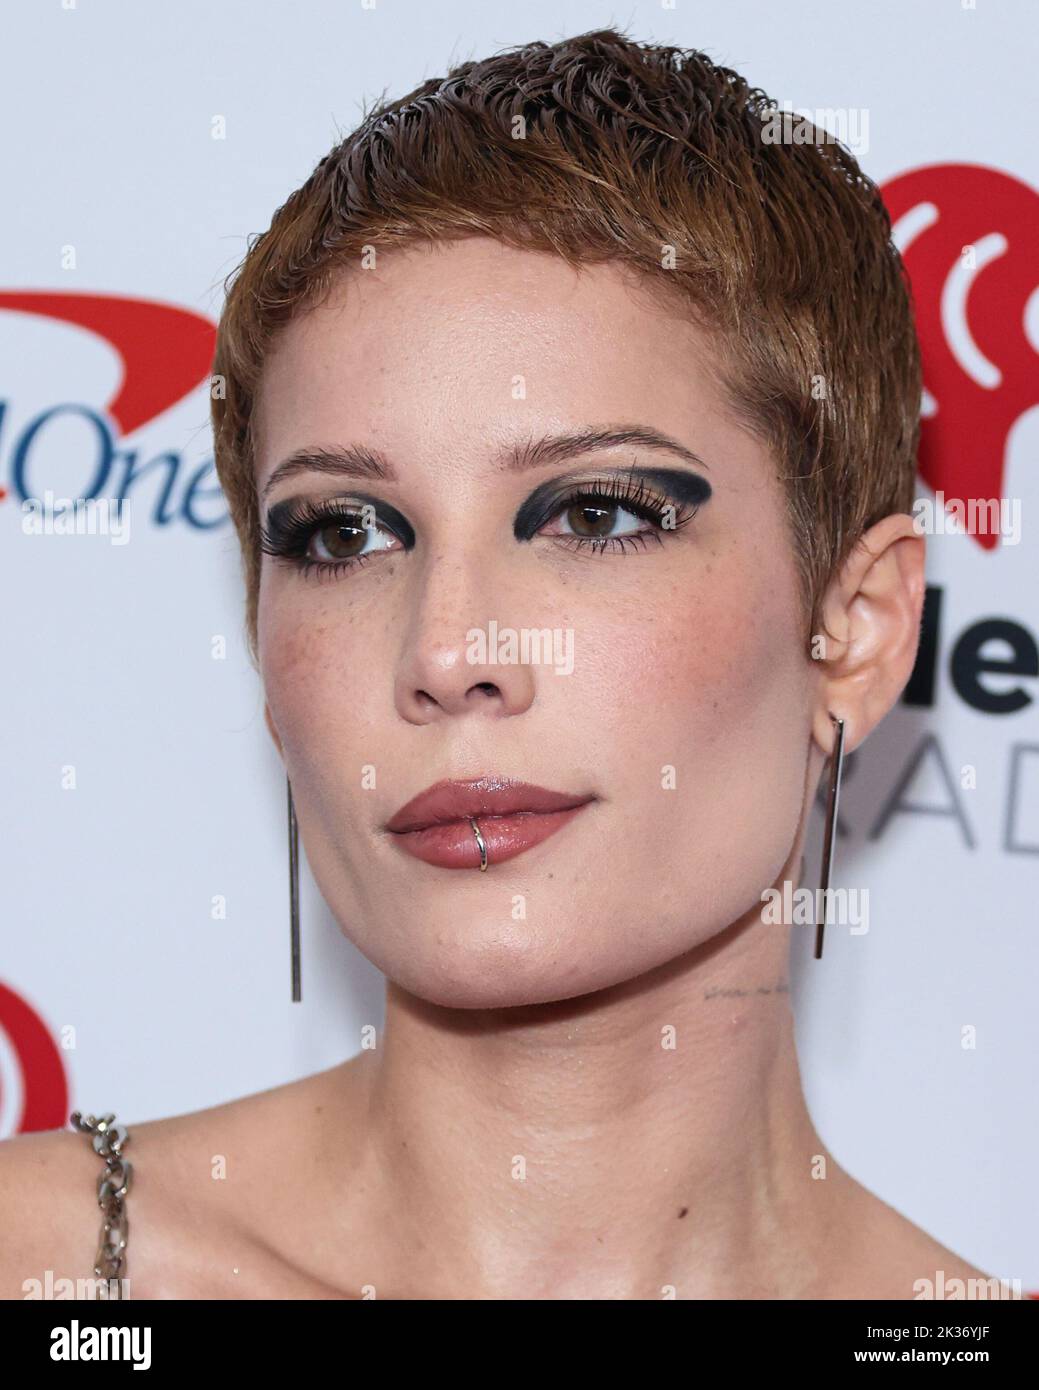 Las Vegas, United States. 24th Sep, 2022. LAS VEGAS, NEVADA, USA - SEPTEMBER 24: Halsey (Ashley Nicolette Frangipane) poses in the press room at the 2022 iHeartRadio Music Festival - Night 2 held at the T-Mobile Arena on September 24, 2022 in Las Vegas, Nevada, United States. (Photo by Xavier Collin/Image Press Agency) Credit: Image Press Agency/Alamy Live News Stock Photo